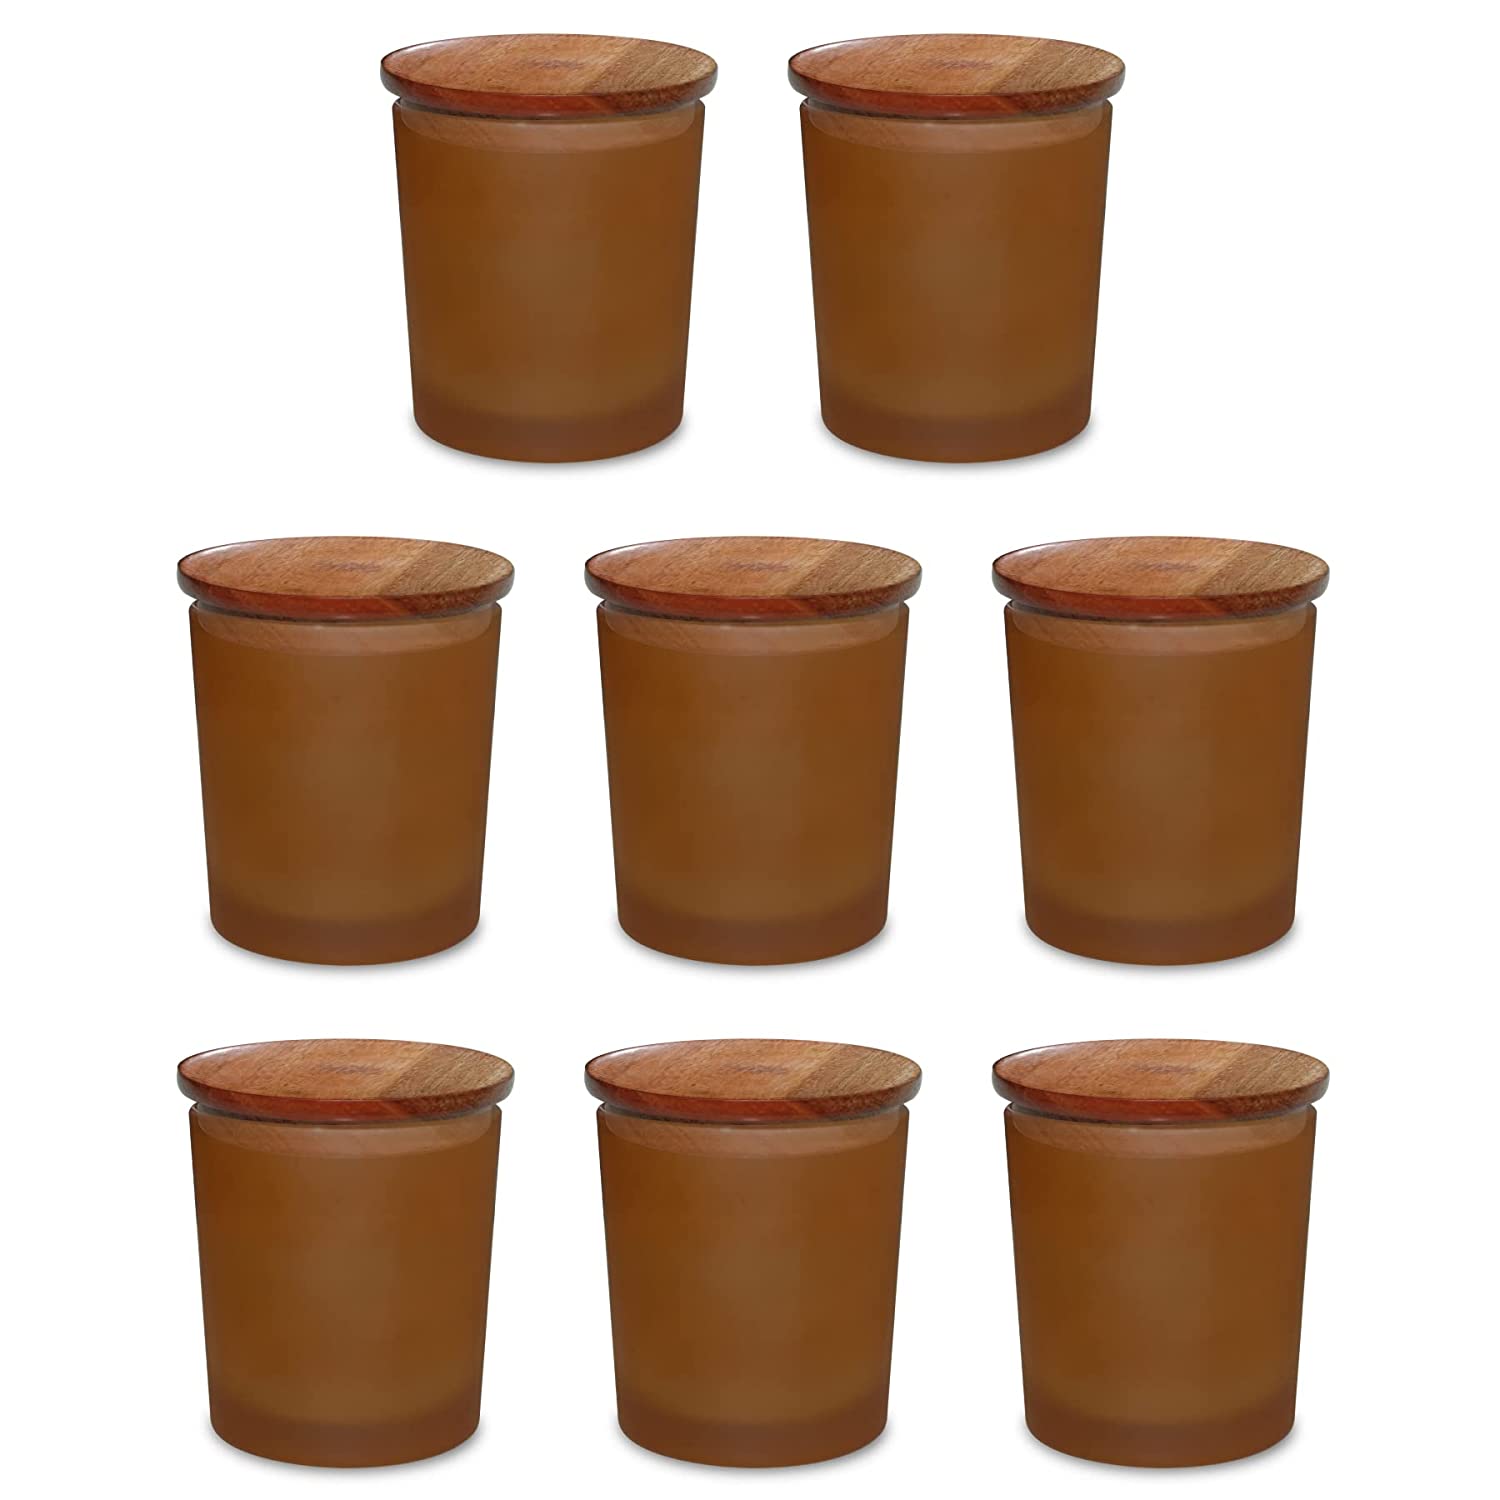 Shoprythm Packaging,Cosmetic Jar Pack of 8 Amber Frosted Glass Jar with Wooden Lid